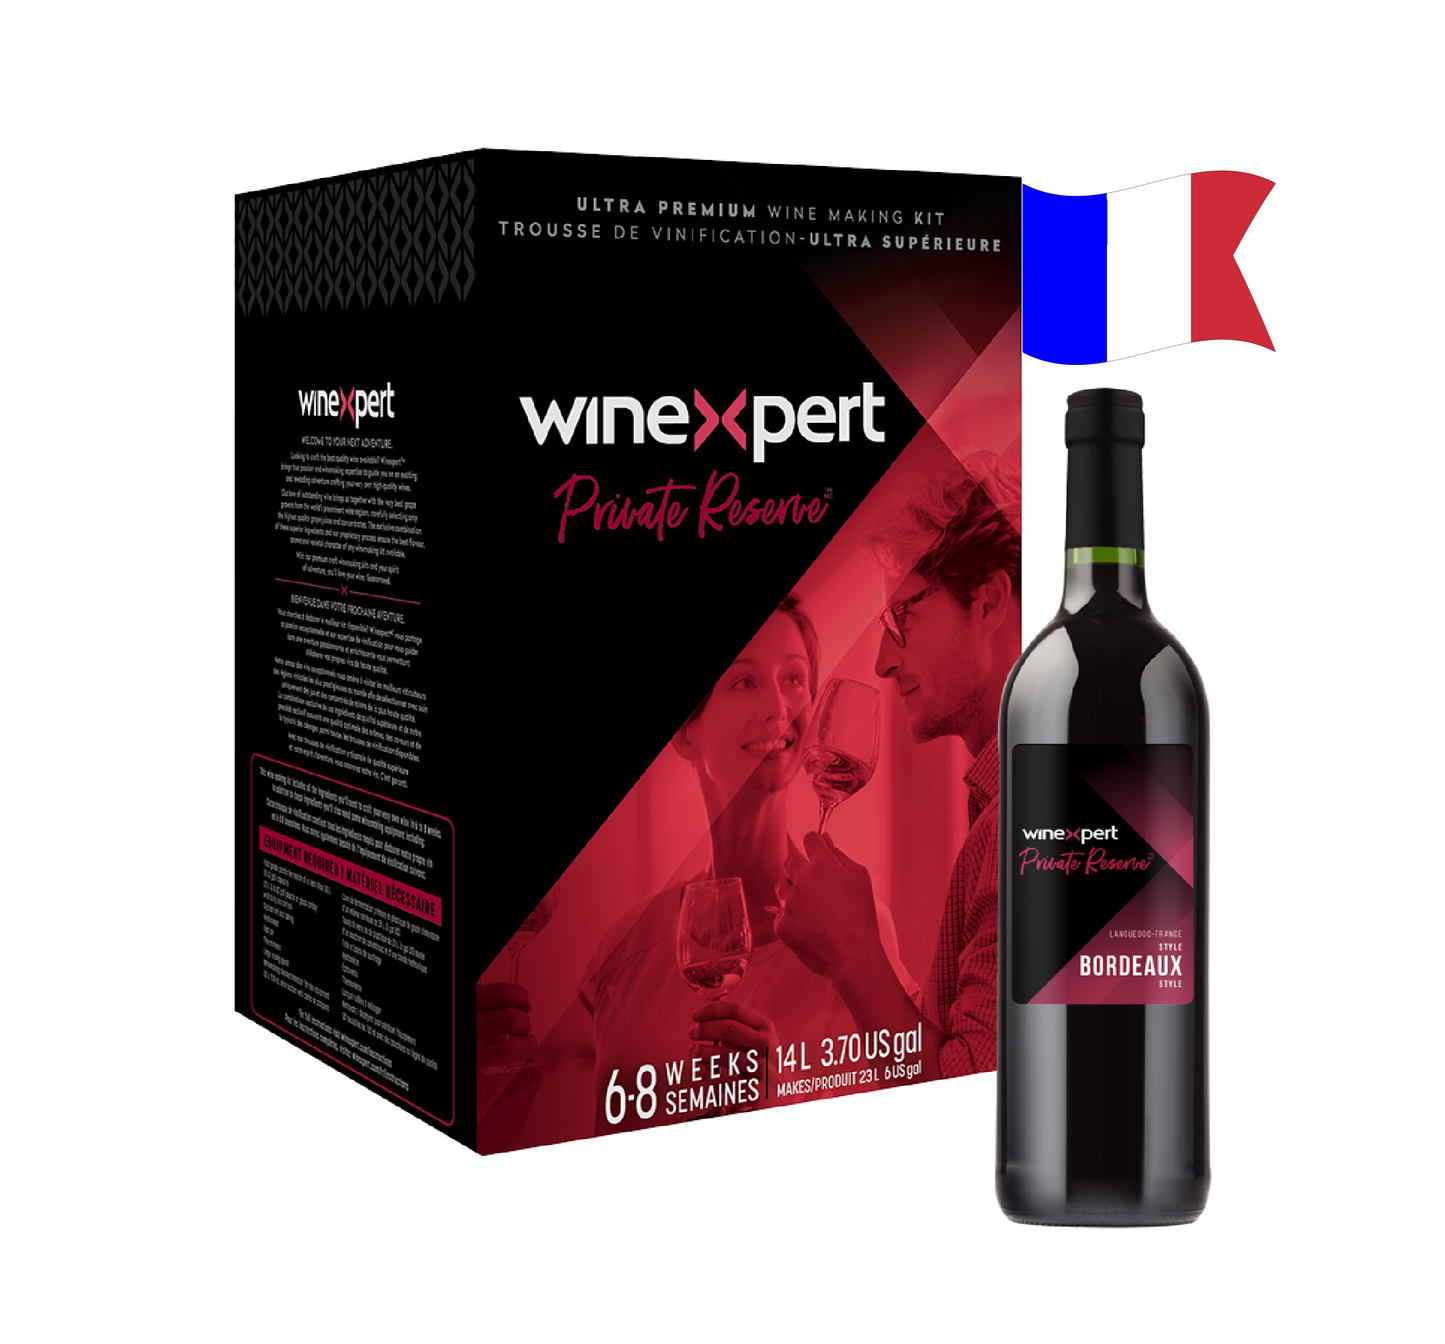 Winexpert Private Reserve Bordeaux Red - Languedoc, France